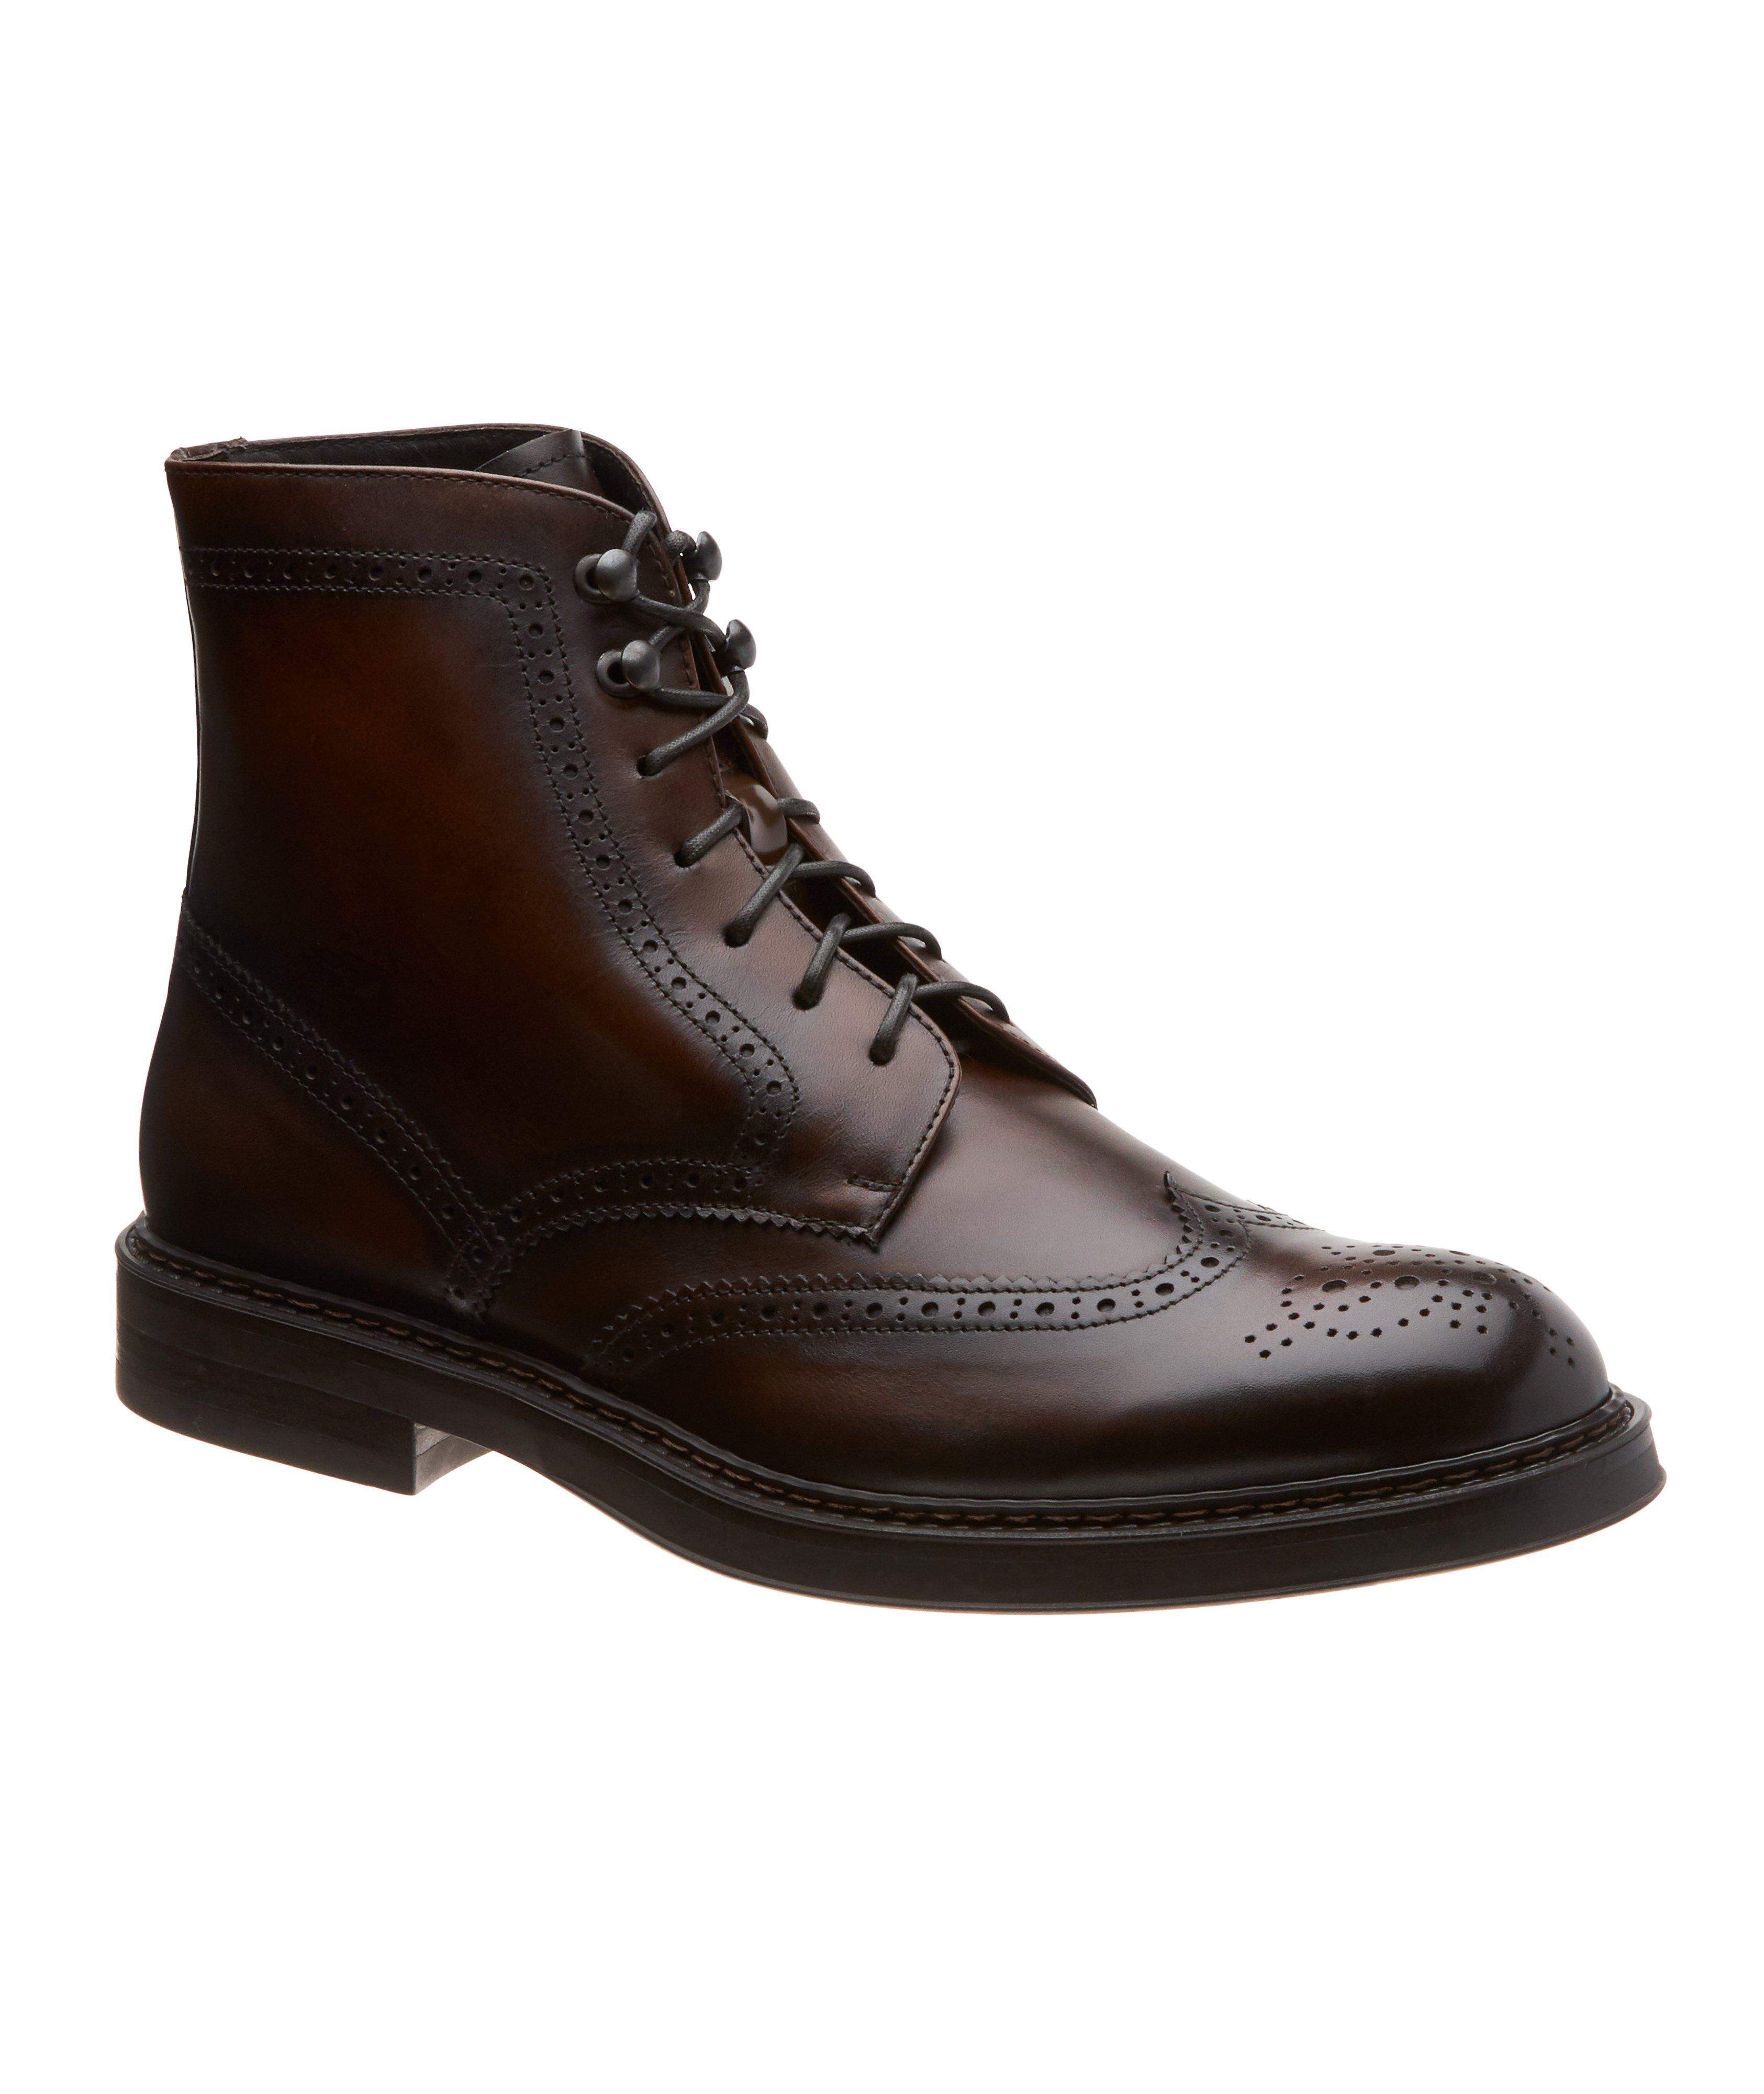 Leather Wingtip Boots image 0